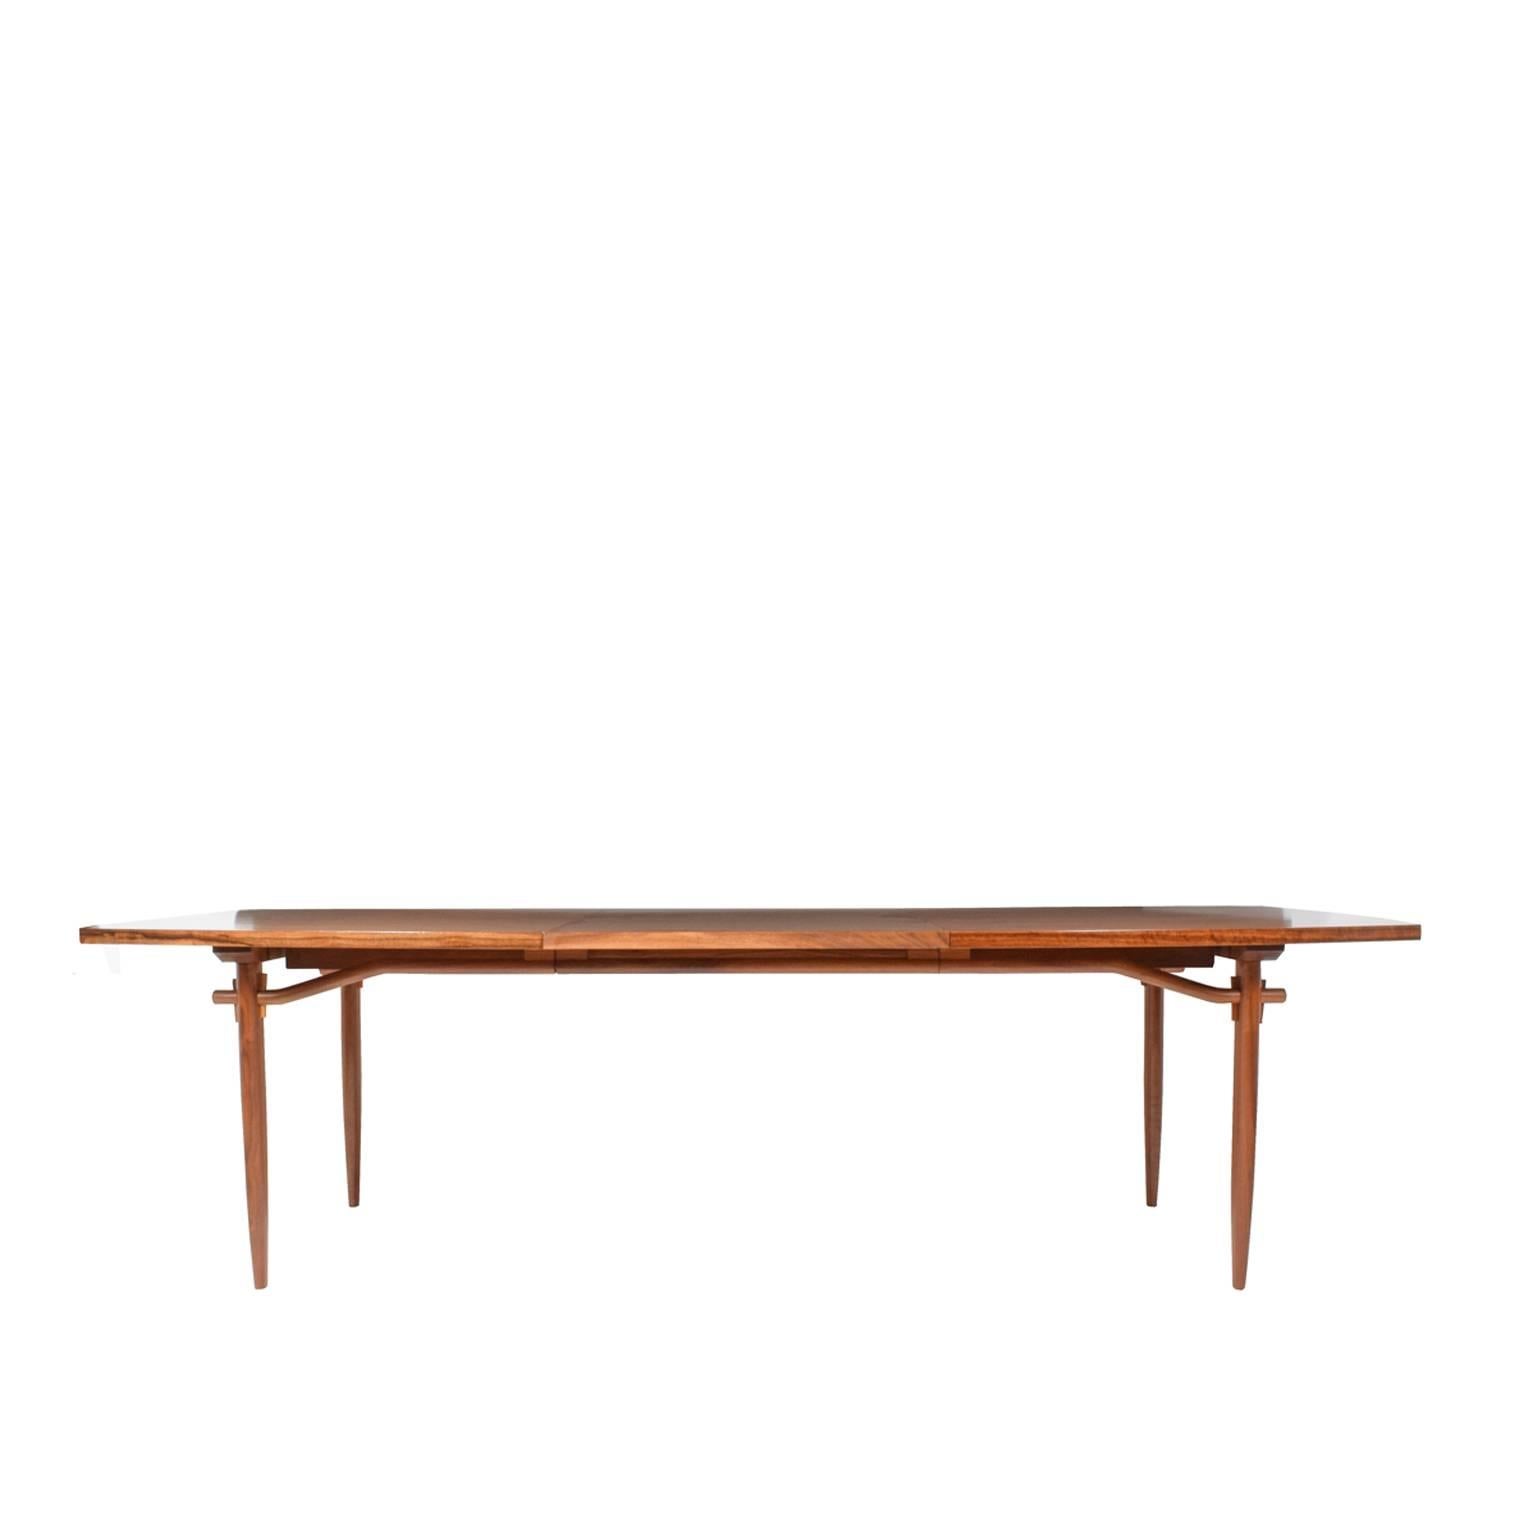 Organic Modern Dining Table # 202-W by George Nakashima for Widdicomb